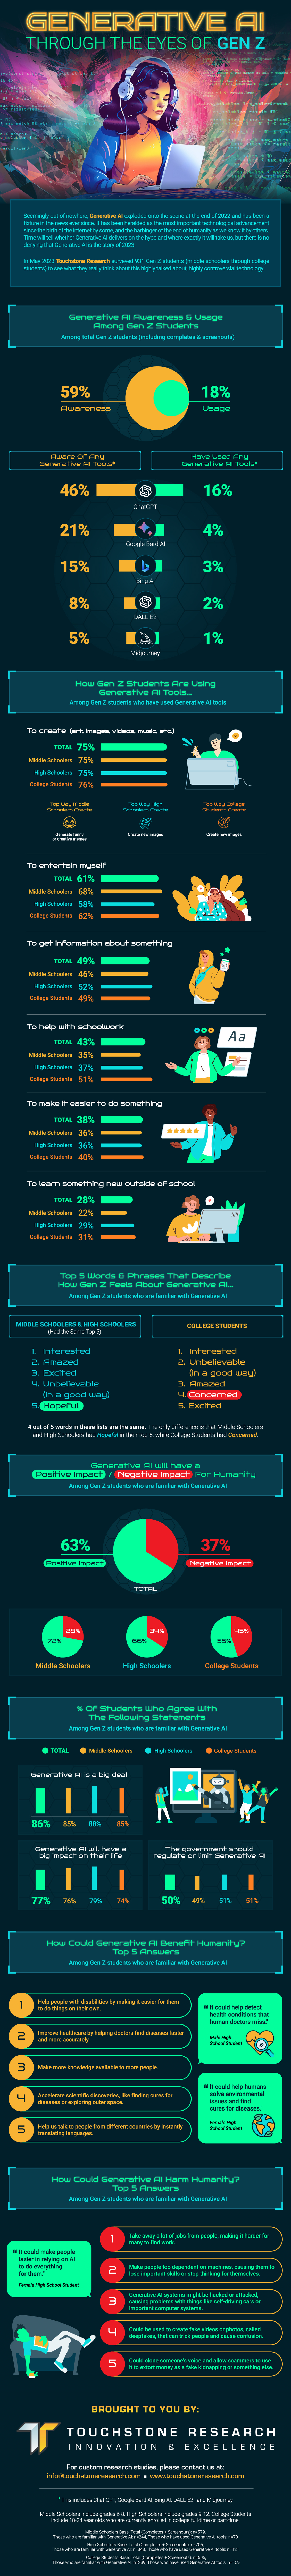 Generative AI Through The Eyes of Gen Z [Infographic]